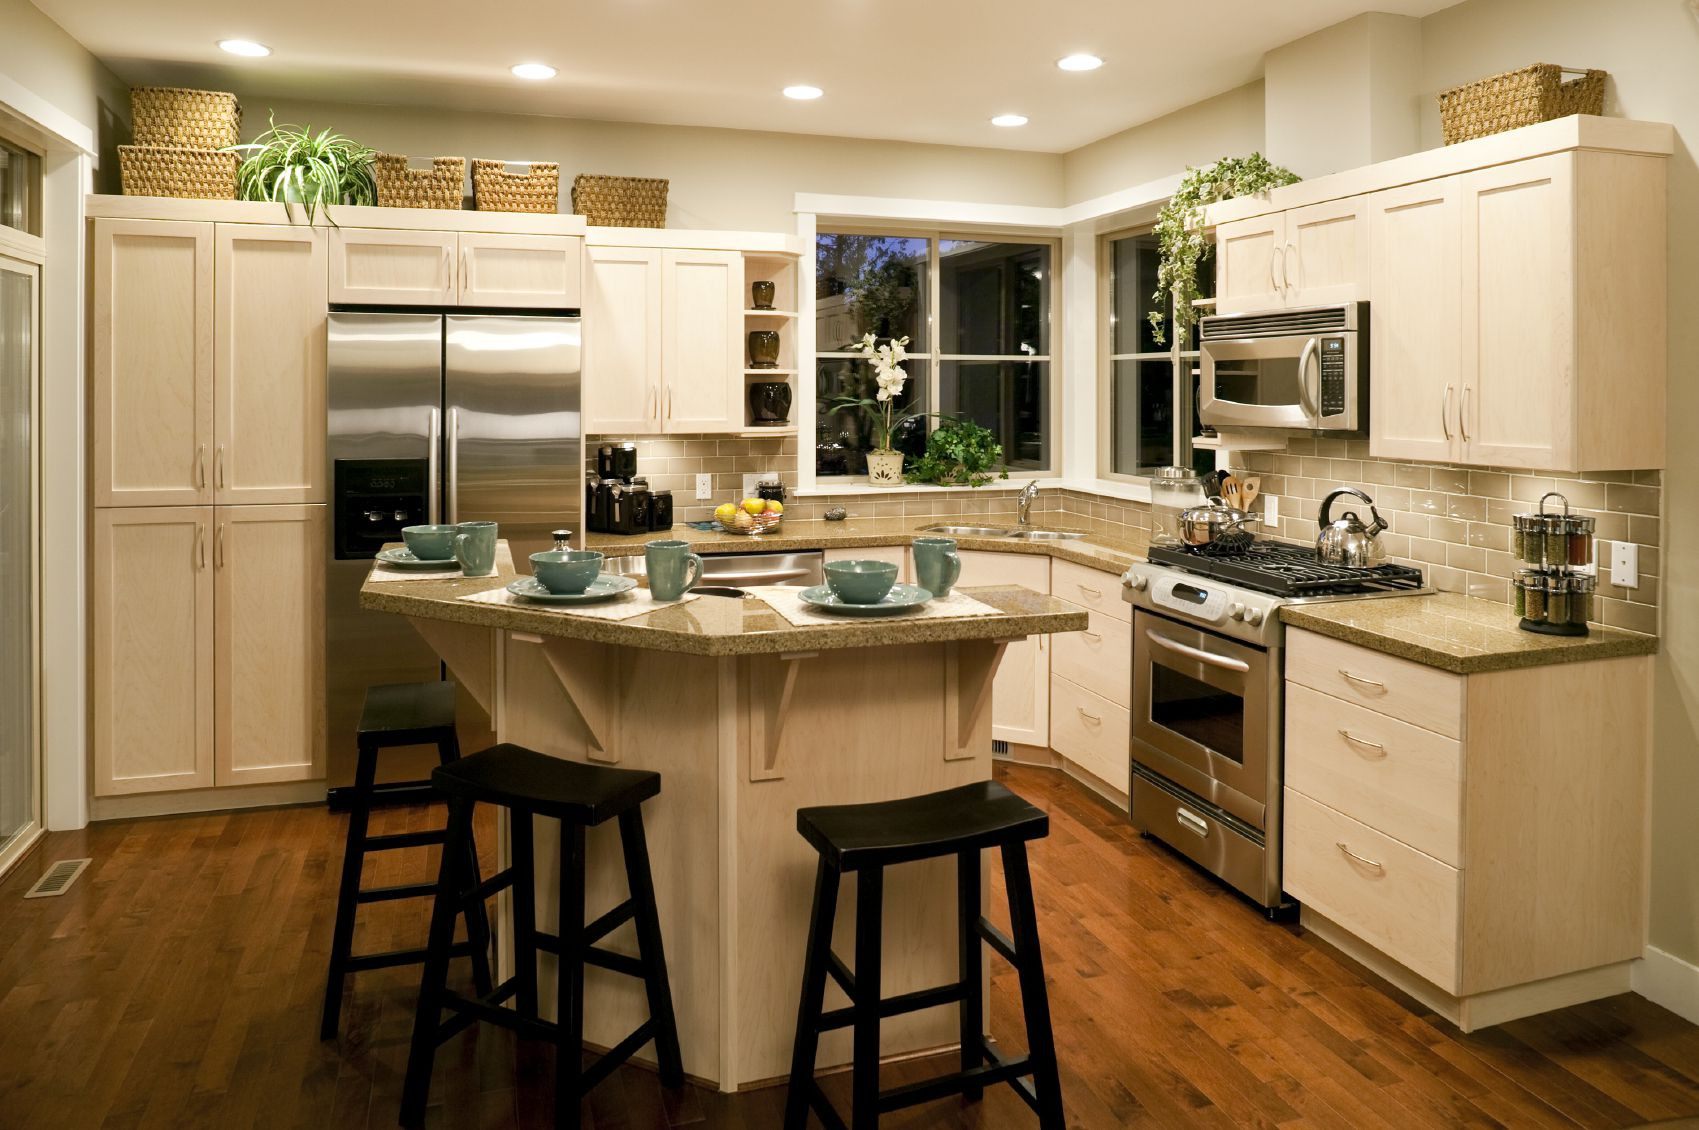 Small Kitchen Ideas With Island
 Awesome Kitchen Island Designs to Realize Well Designed